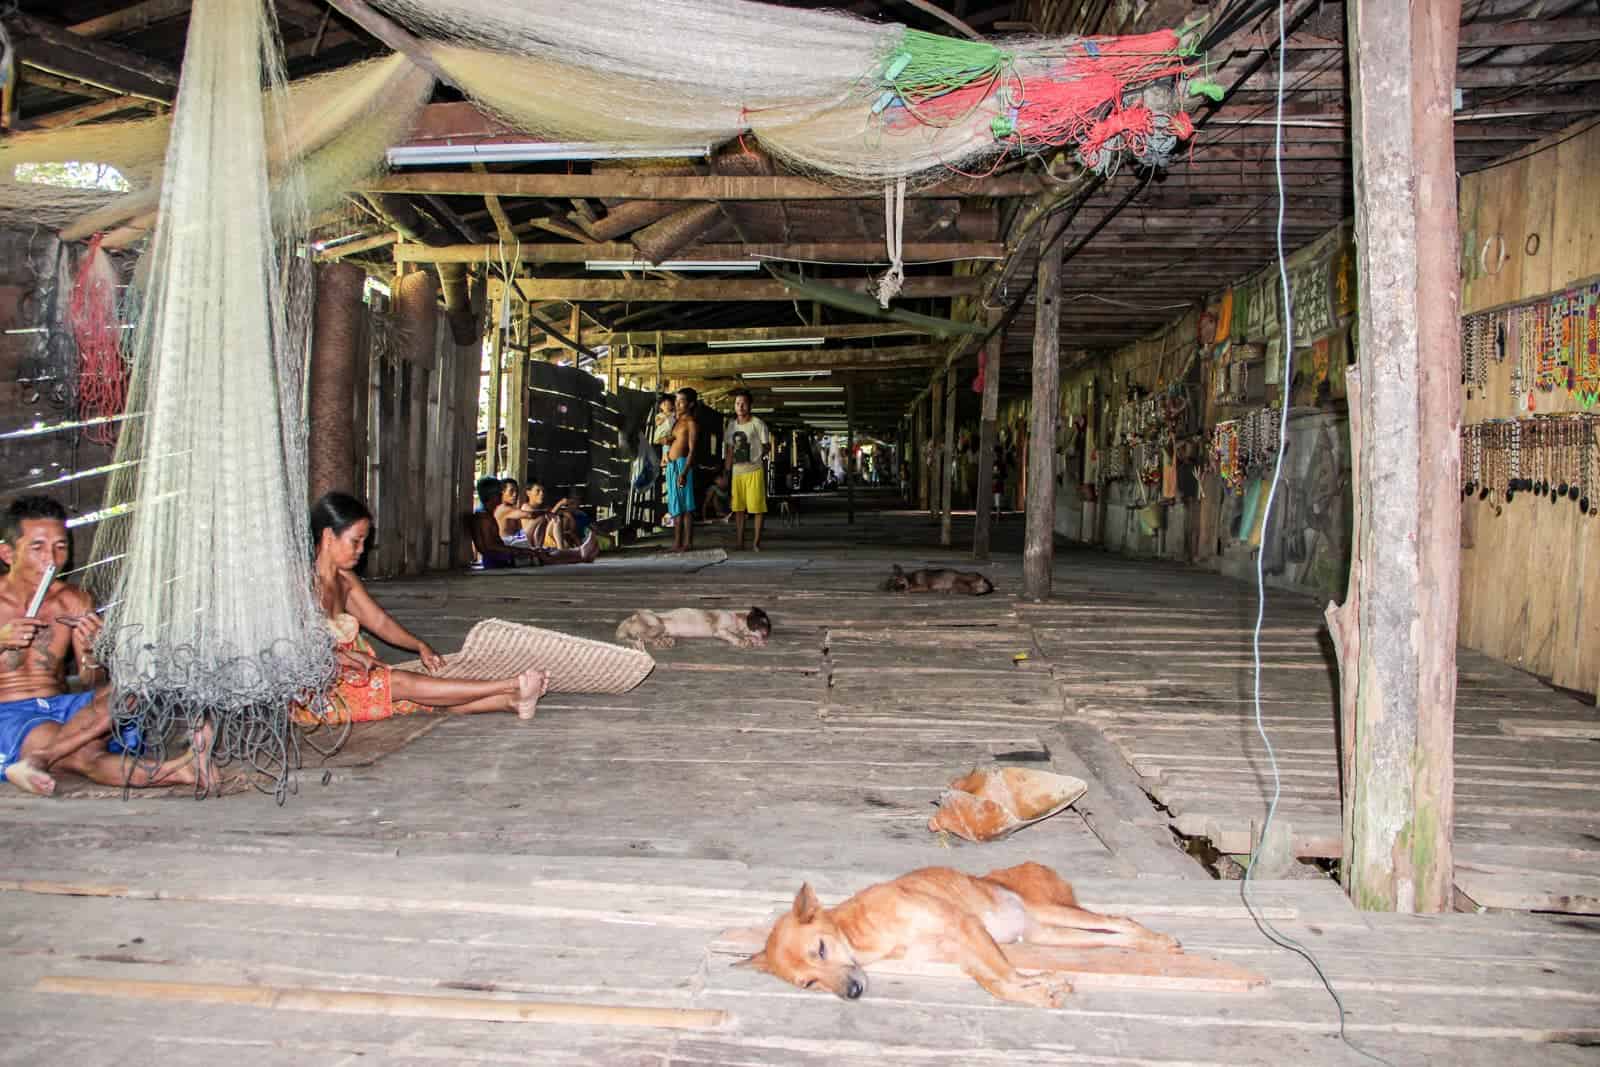 Inside an Iban Longhouse in Borneo